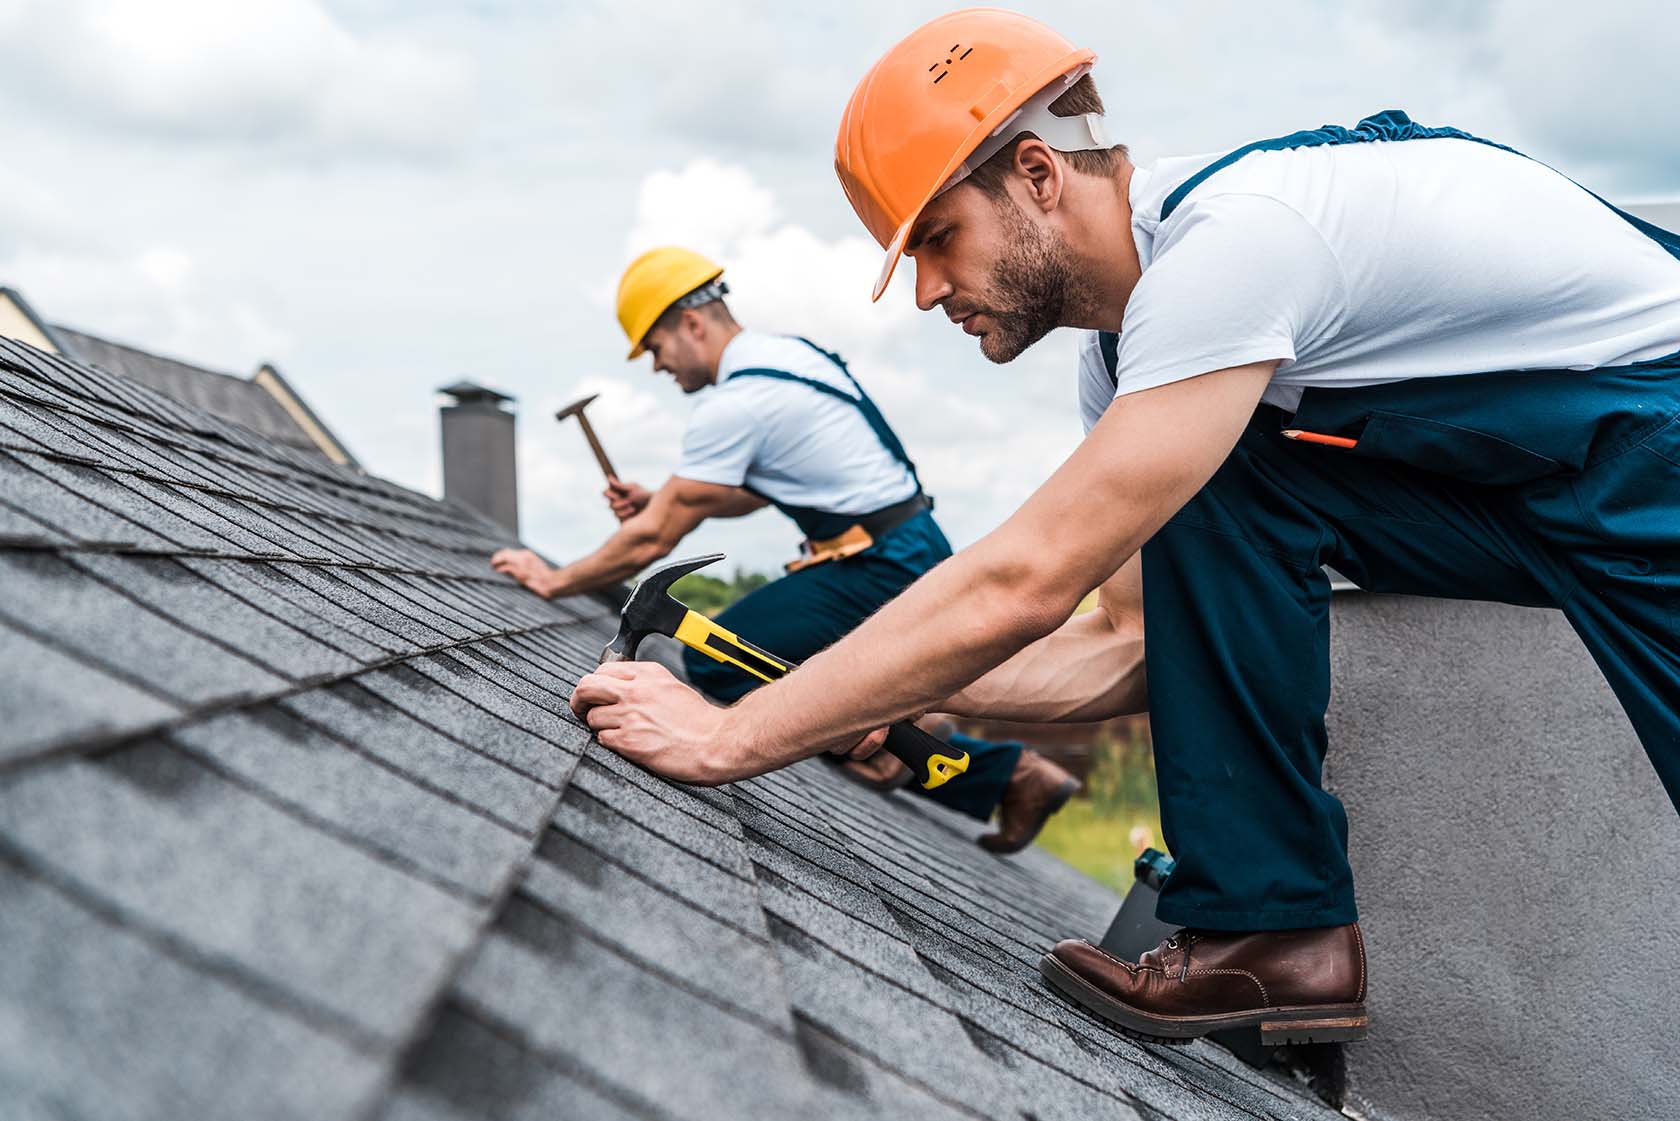 5 Tips On Choosing The Right Roof Overhang